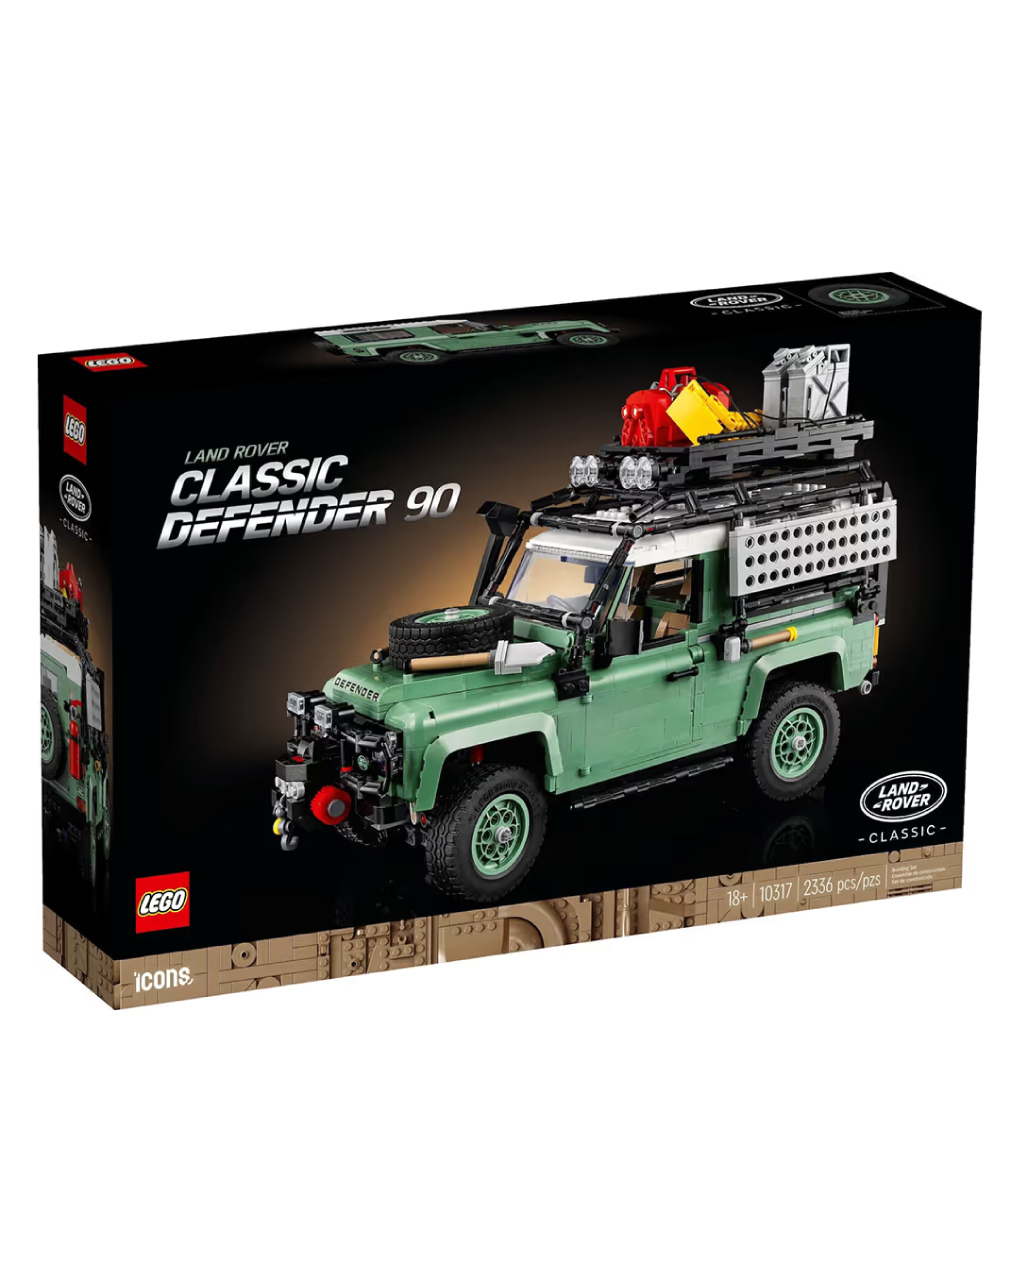 Lego icons land rover classic defender 90 10317 - LEGO ICONS